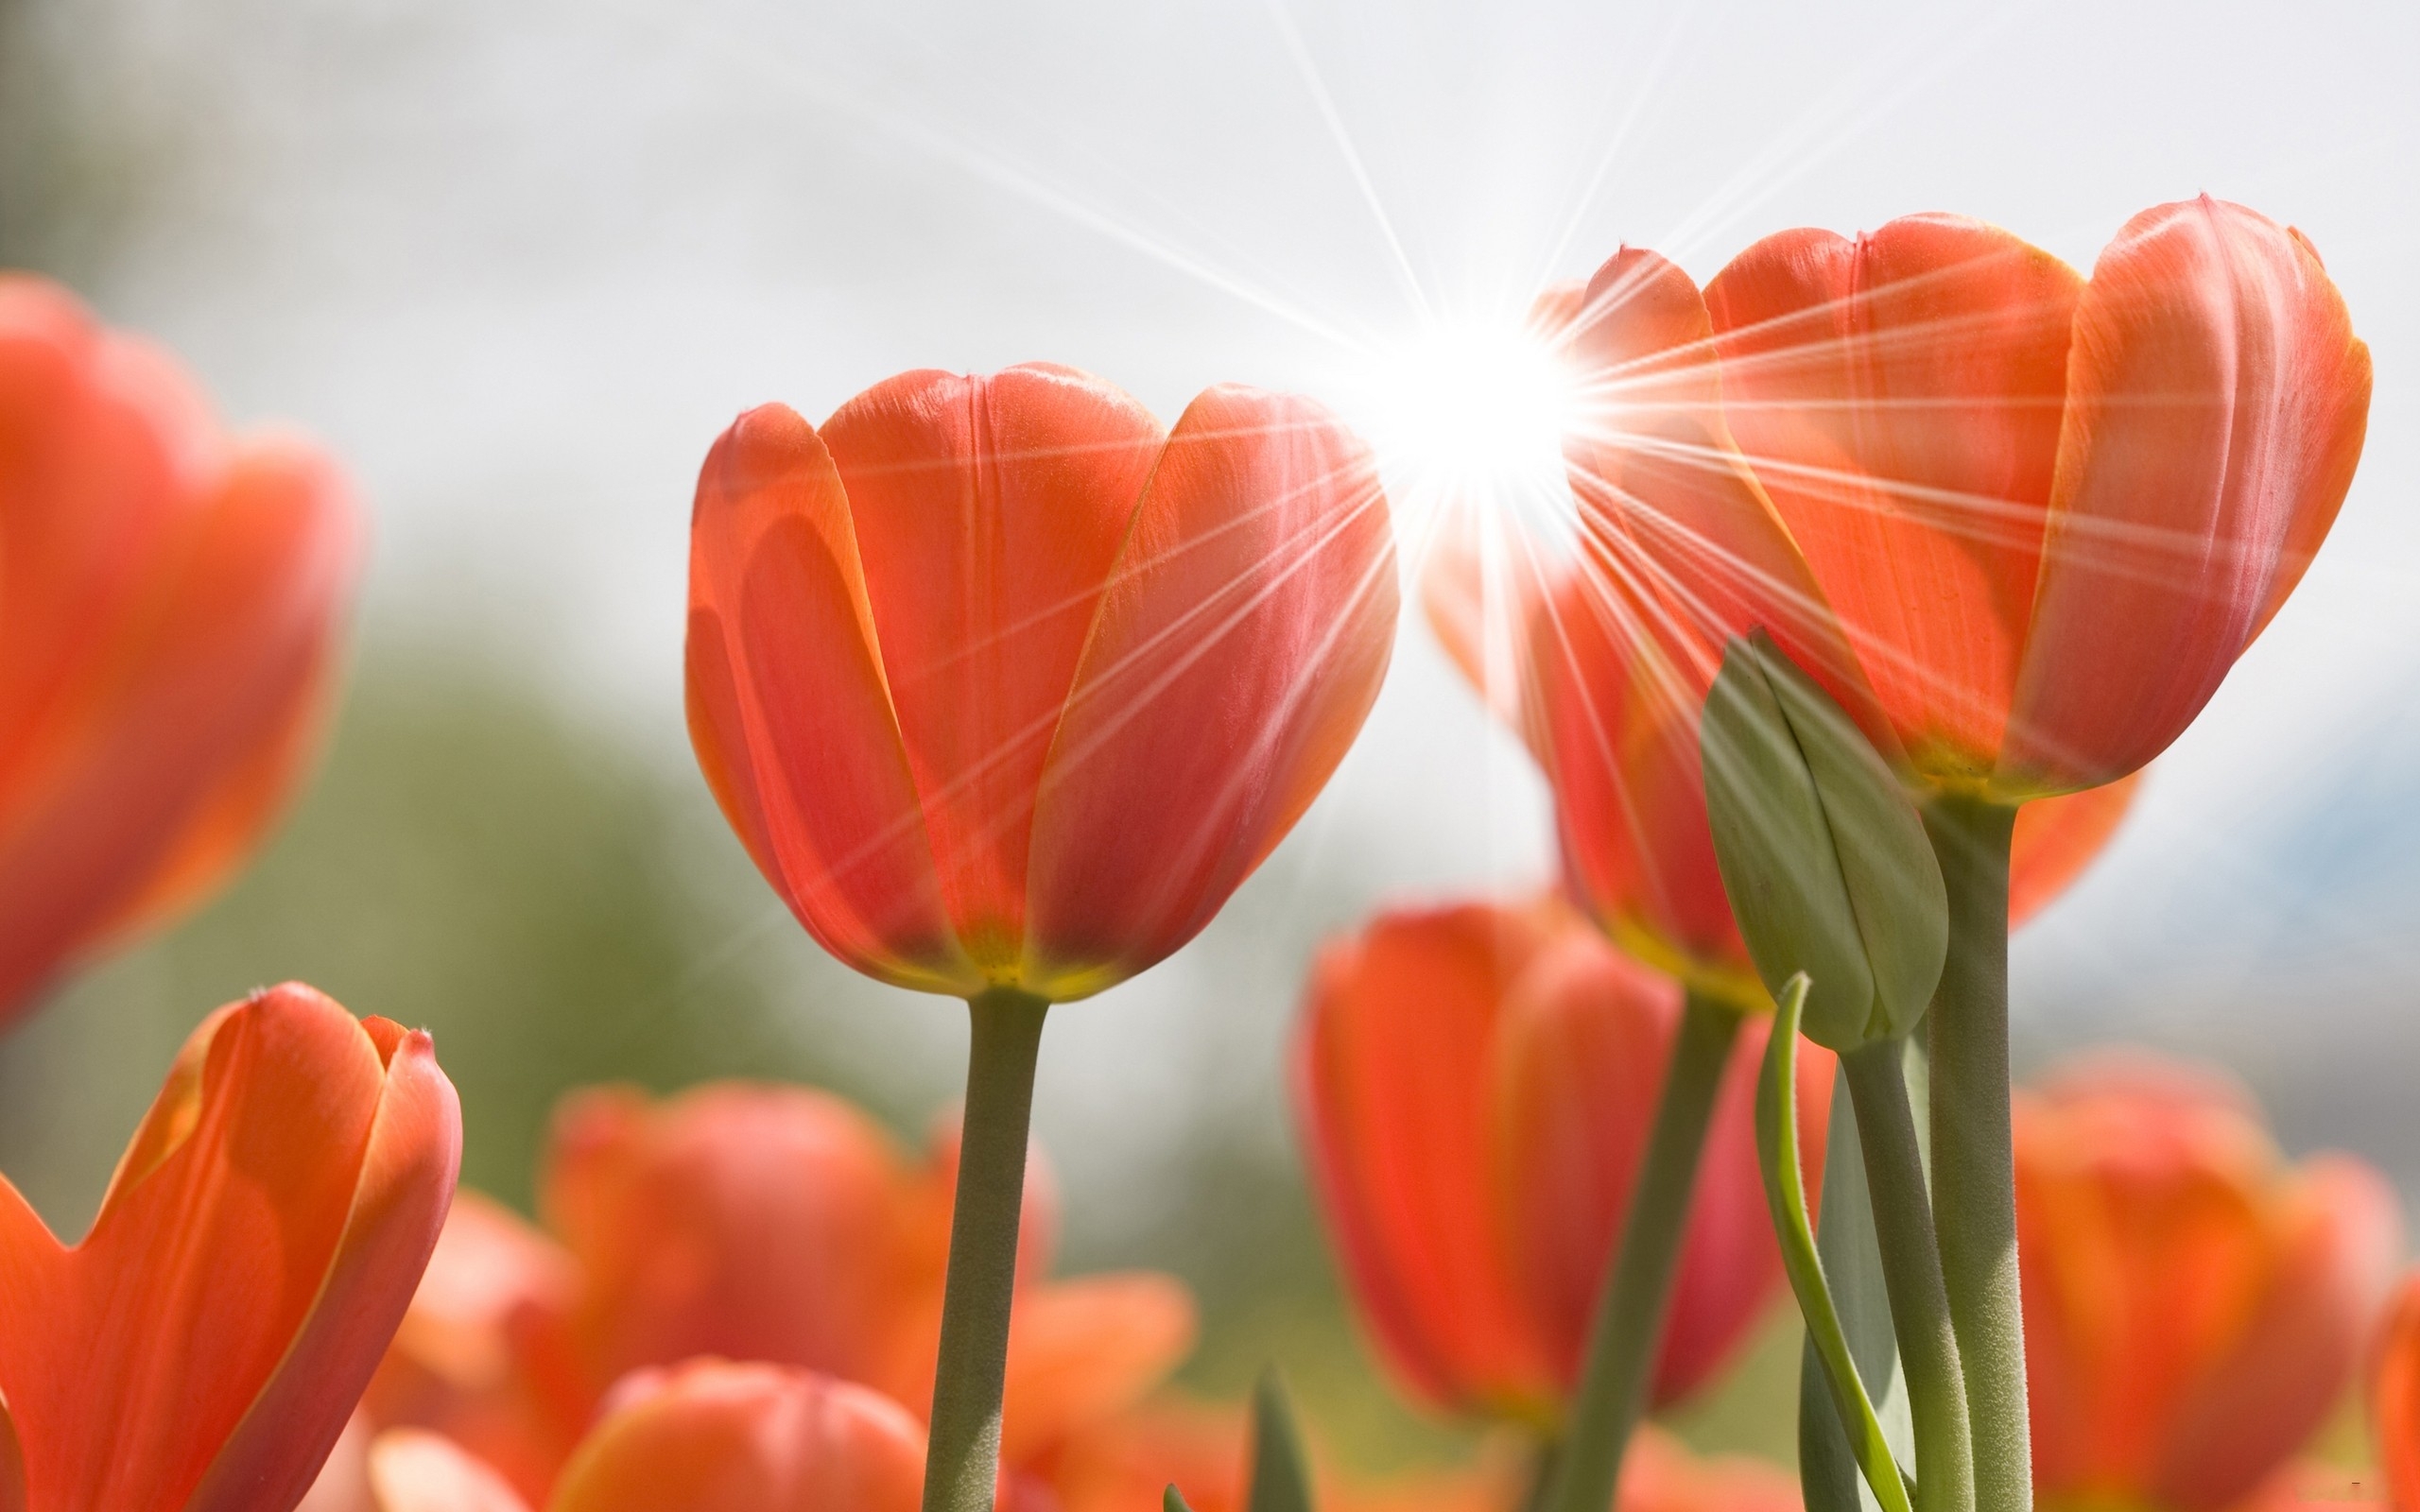 Tulips In The Spring Sunshine Wallpaper And Image